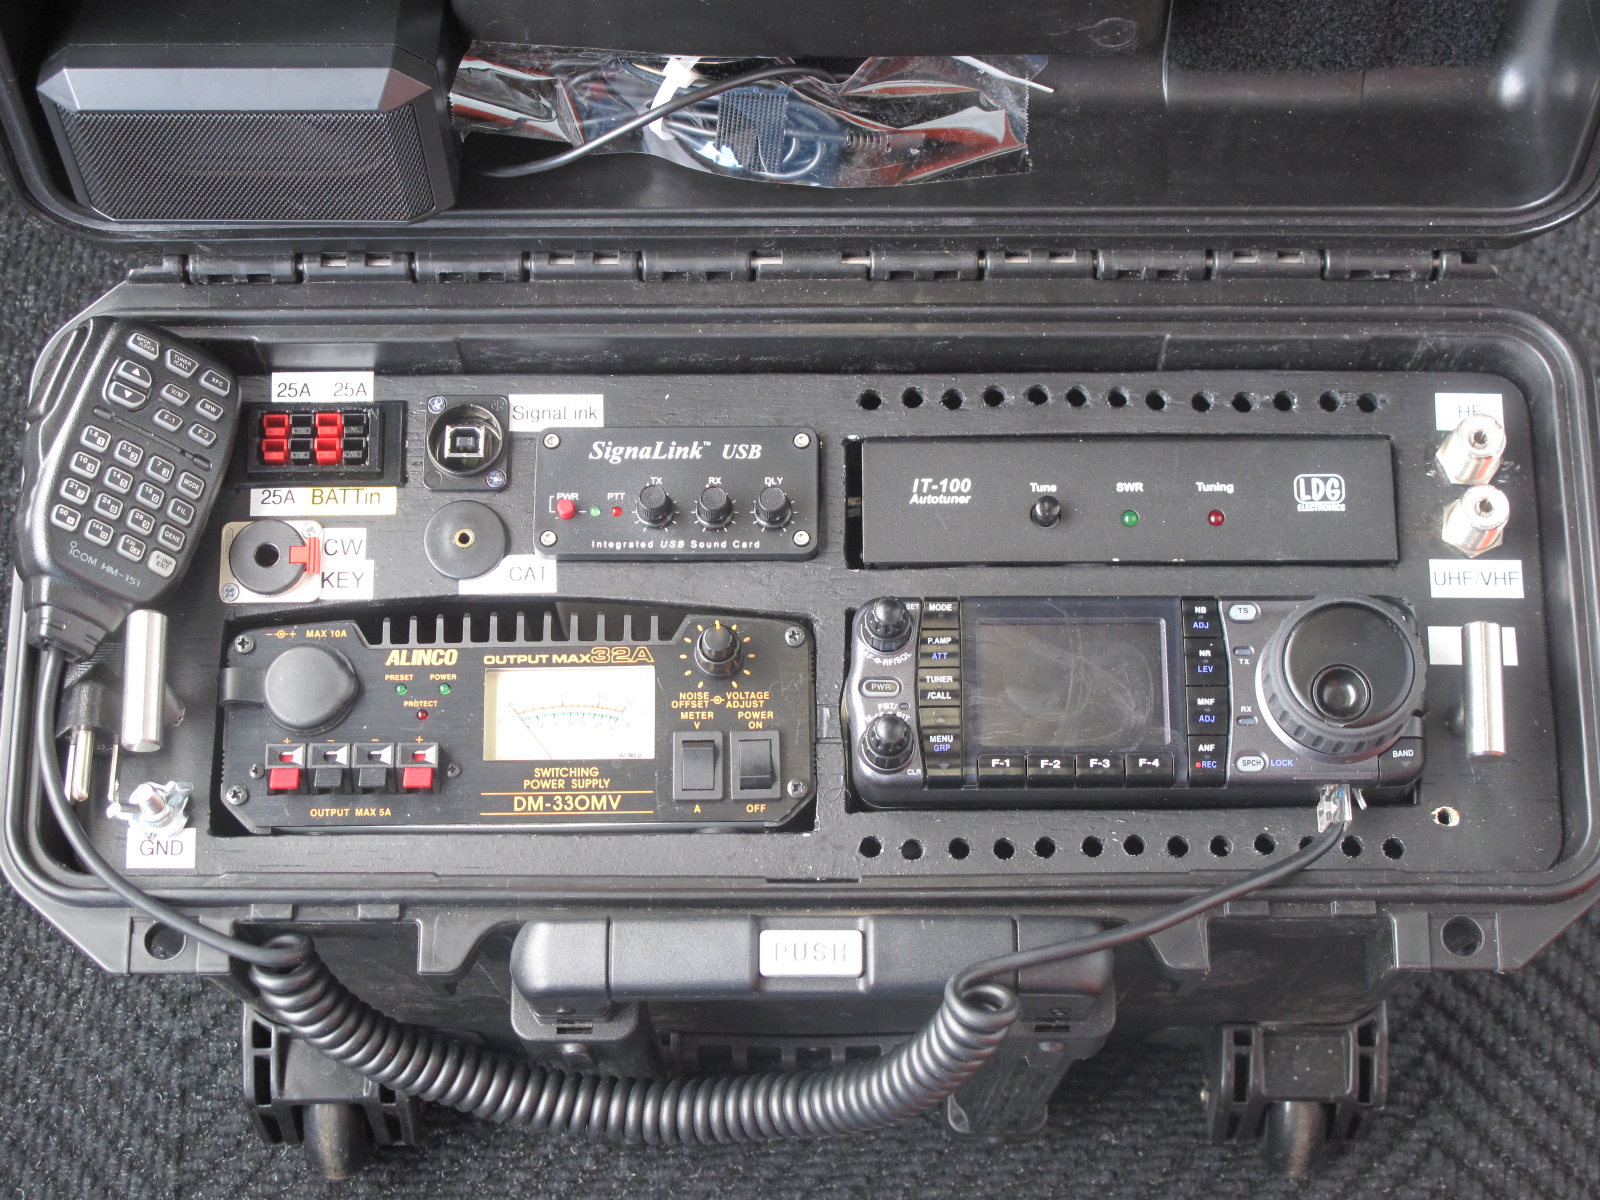 My experiences with digital amateur radio, GO-boxes and QRP